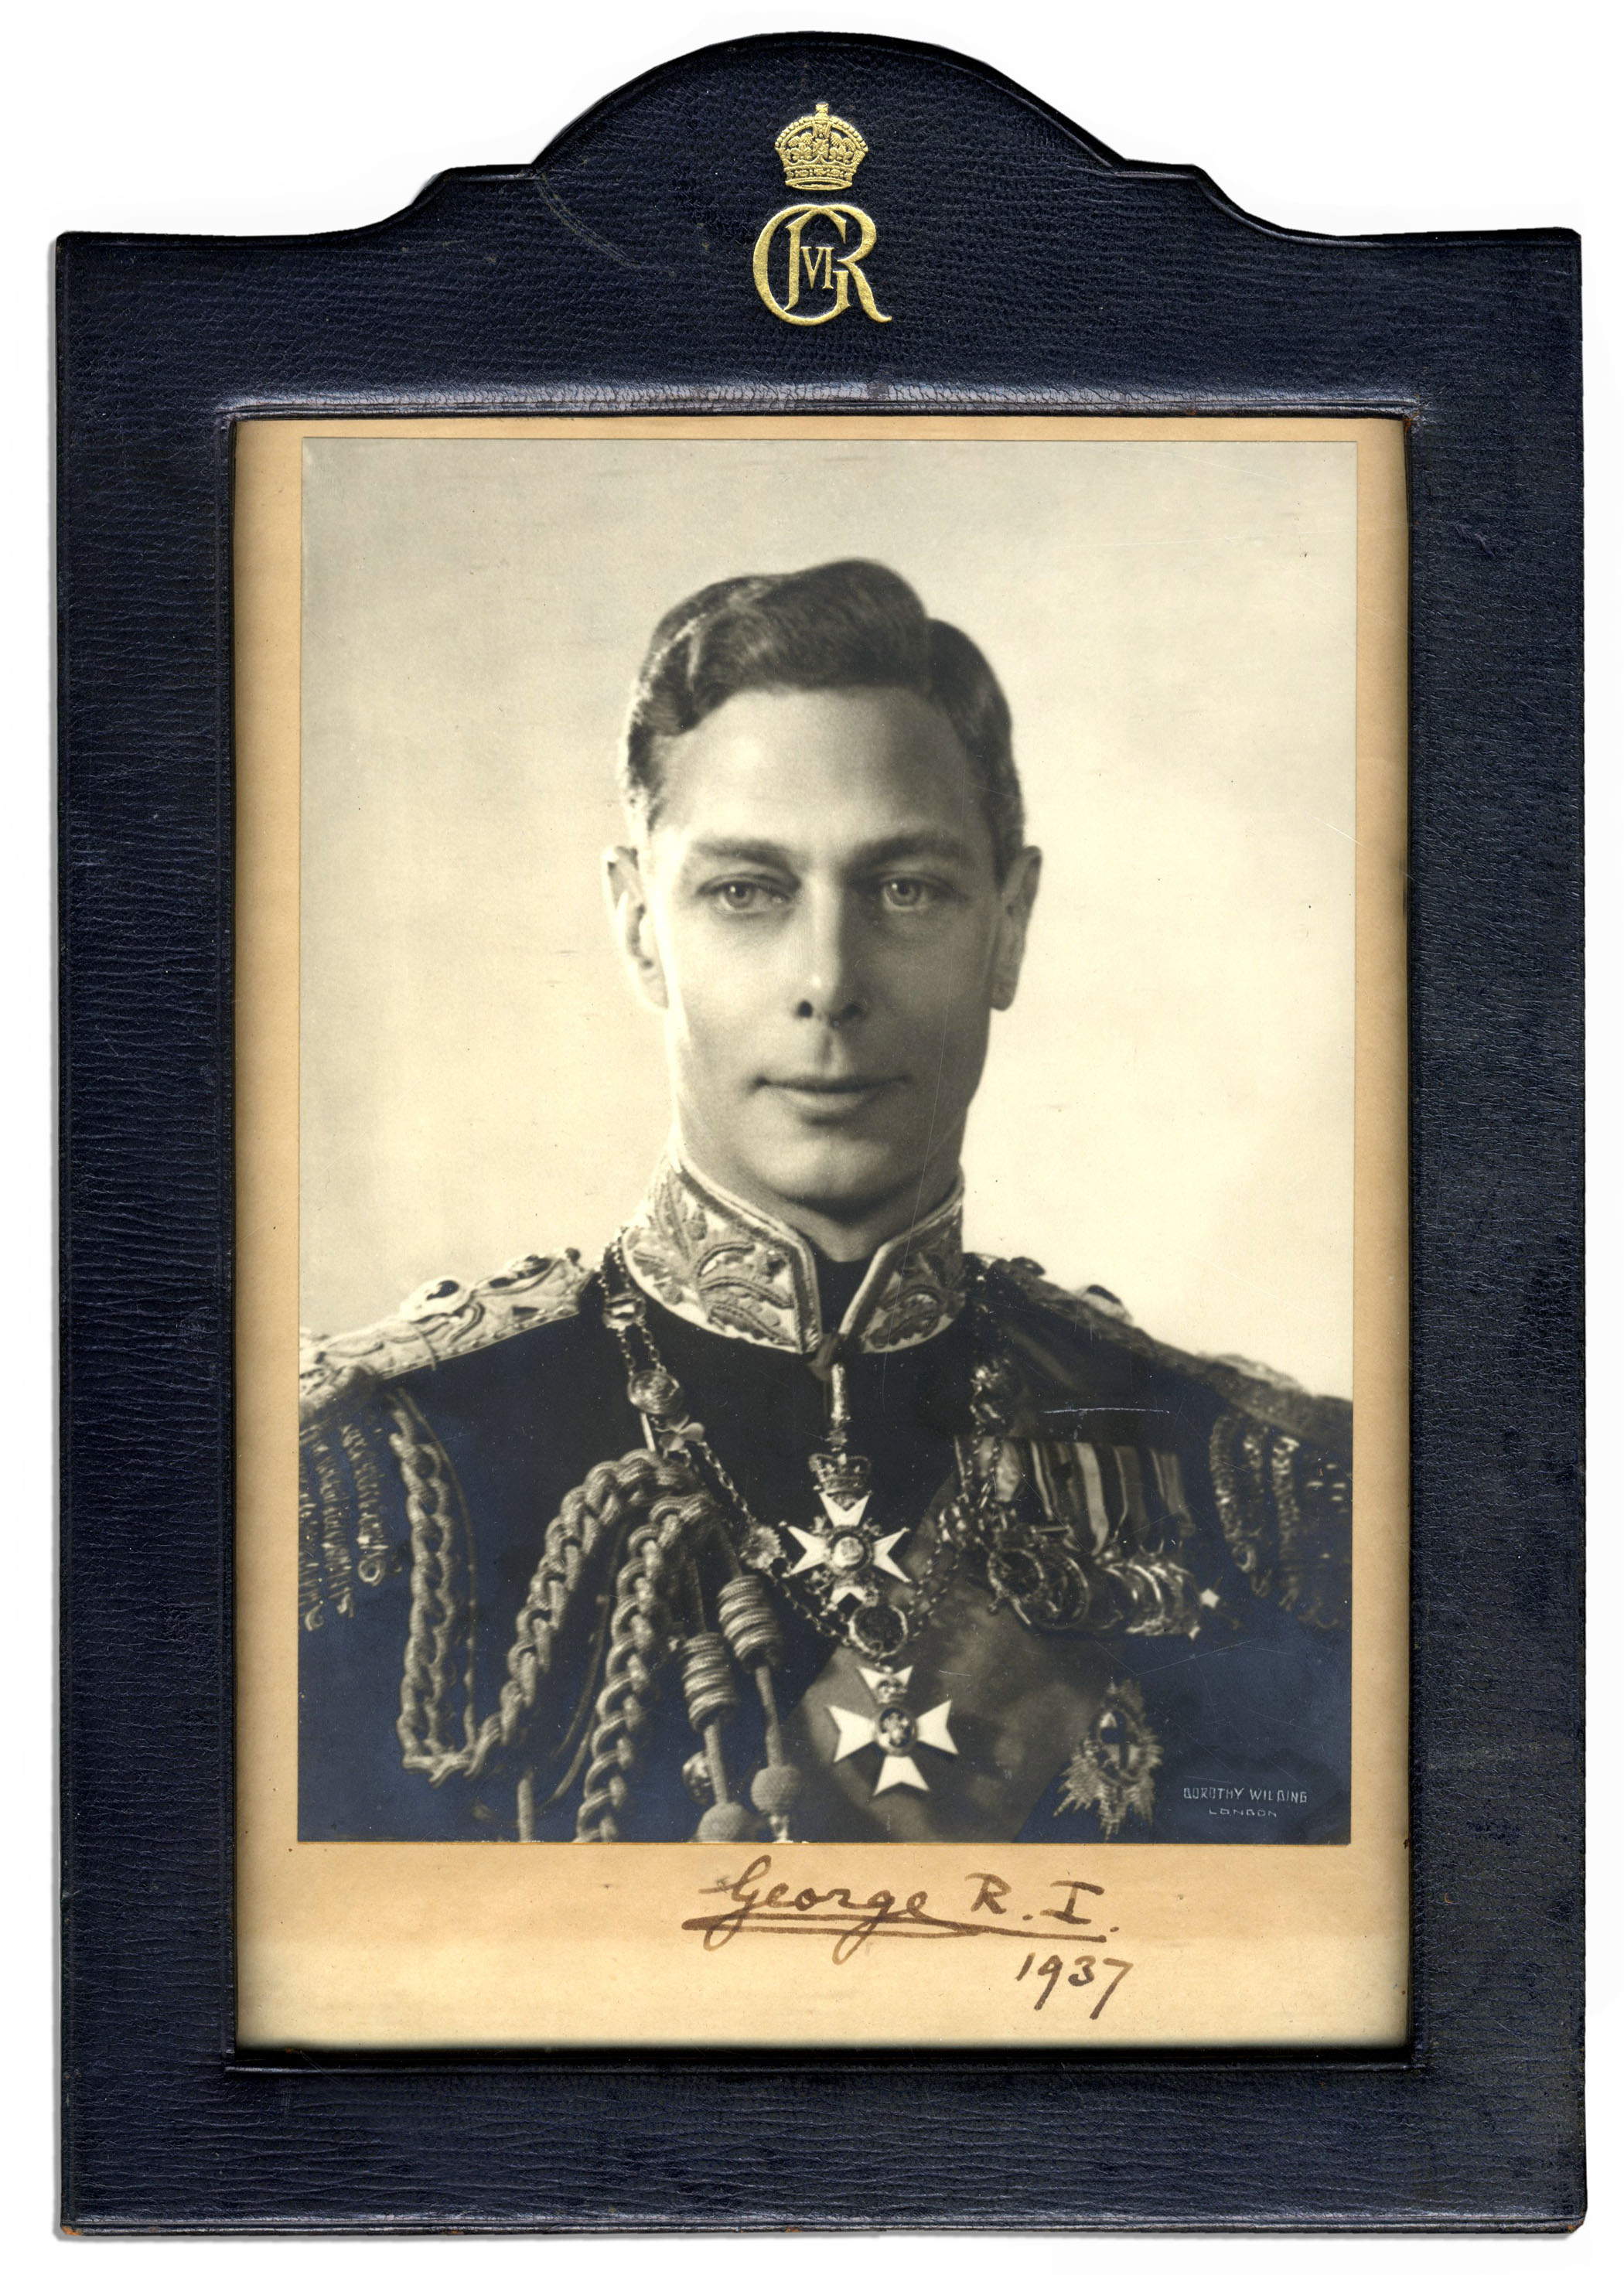 King George Memorabilia George VI Signed Photo in Royal Cypher Frame -- 1937 as King